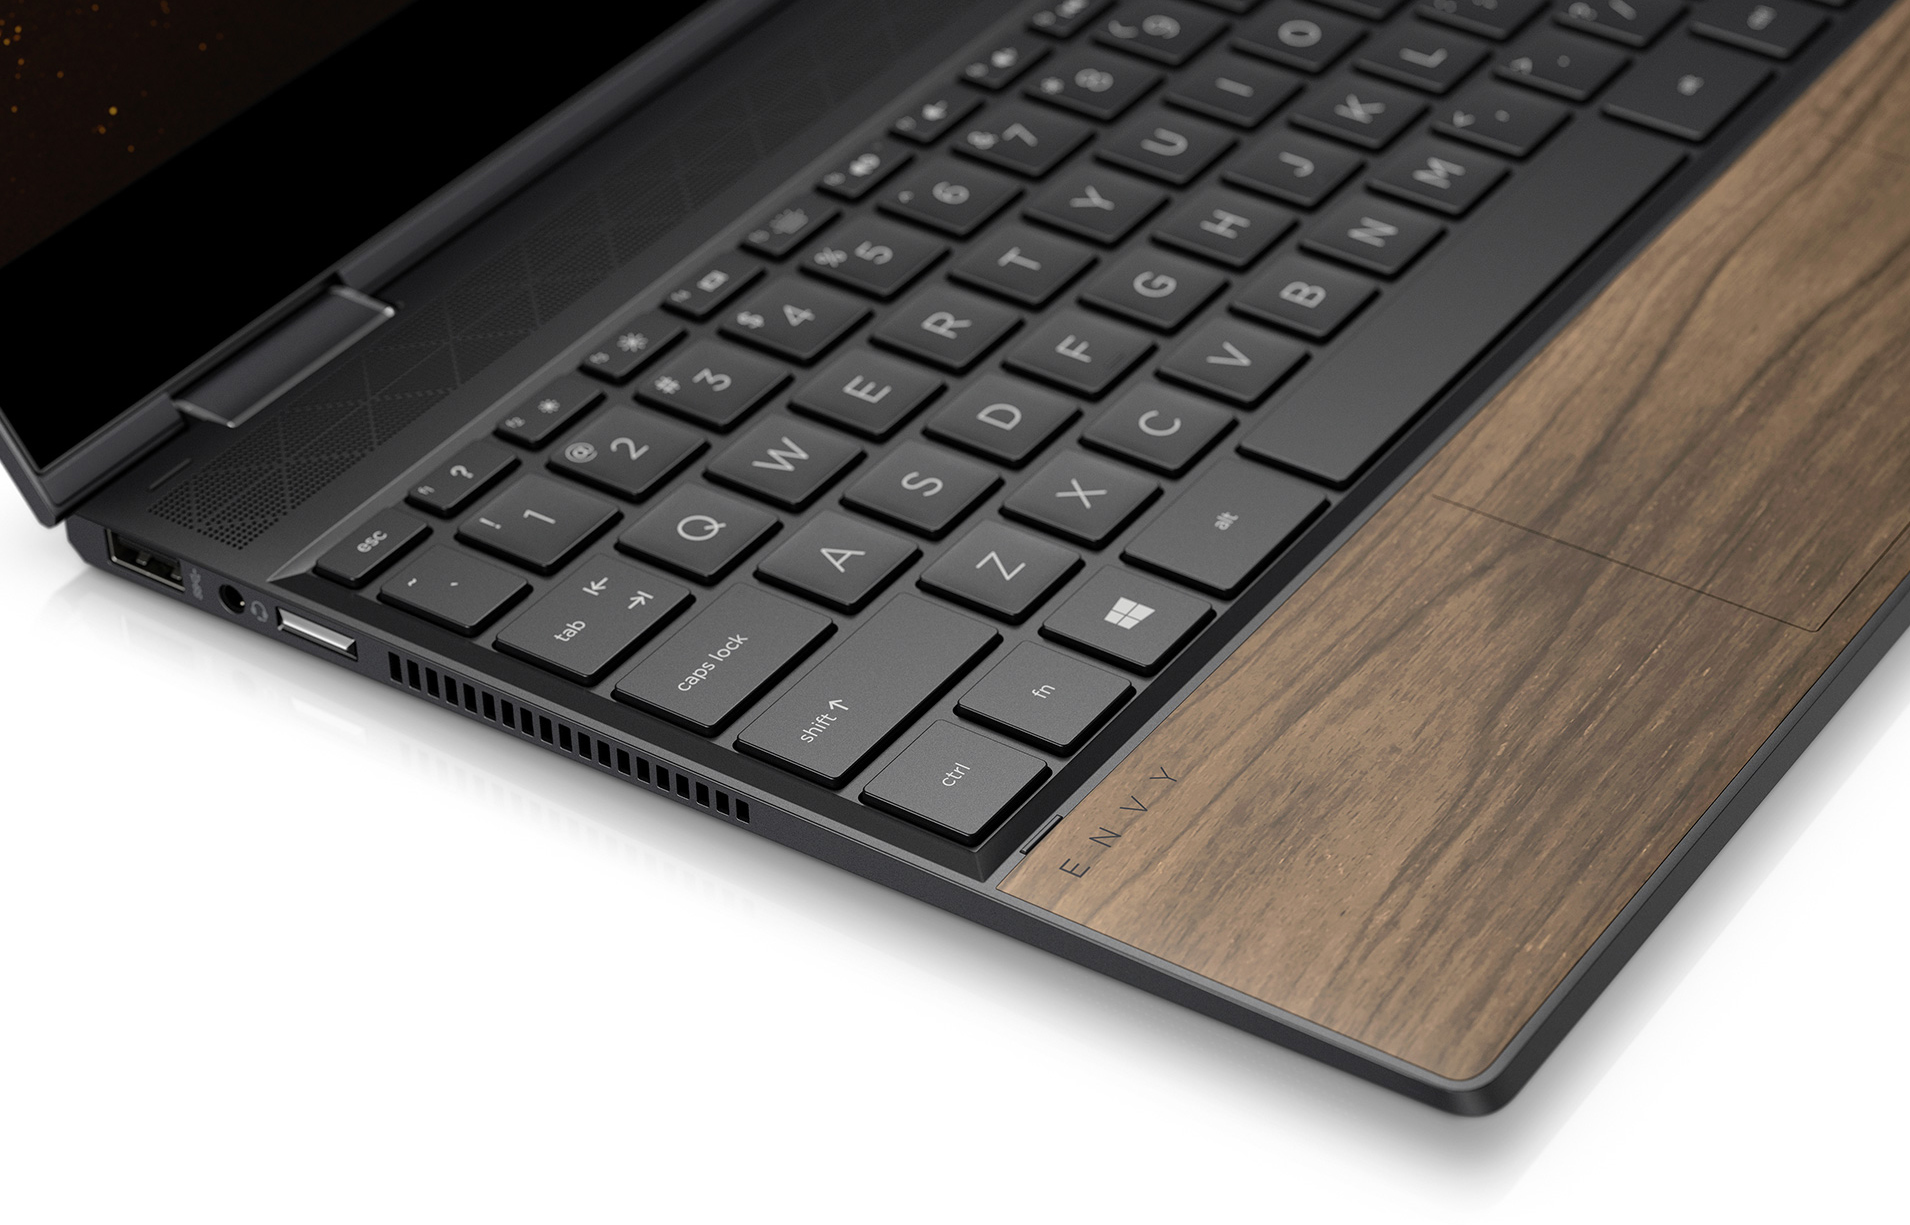 HP's Envy x360 13 Wood Edition w/ AMD Ryzen Now Available